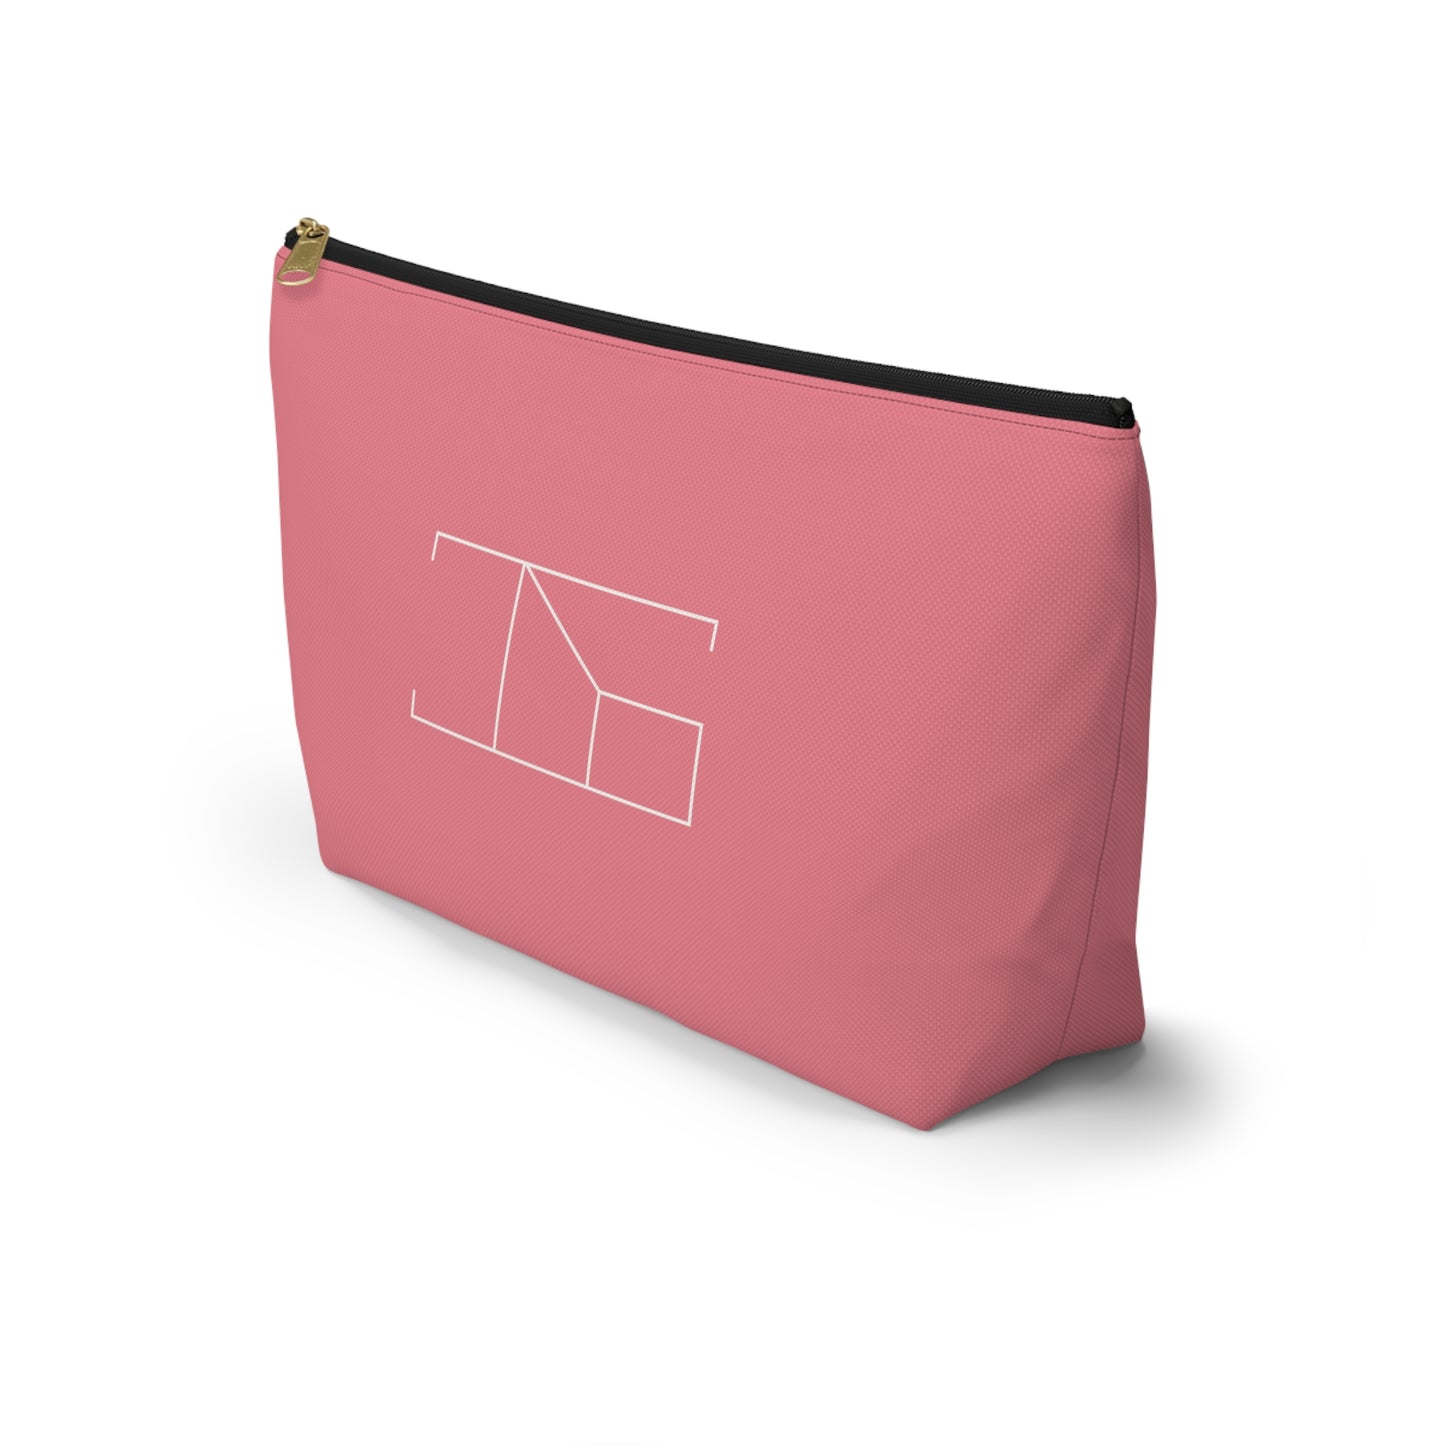 Toiletry Pouch - Light Coral